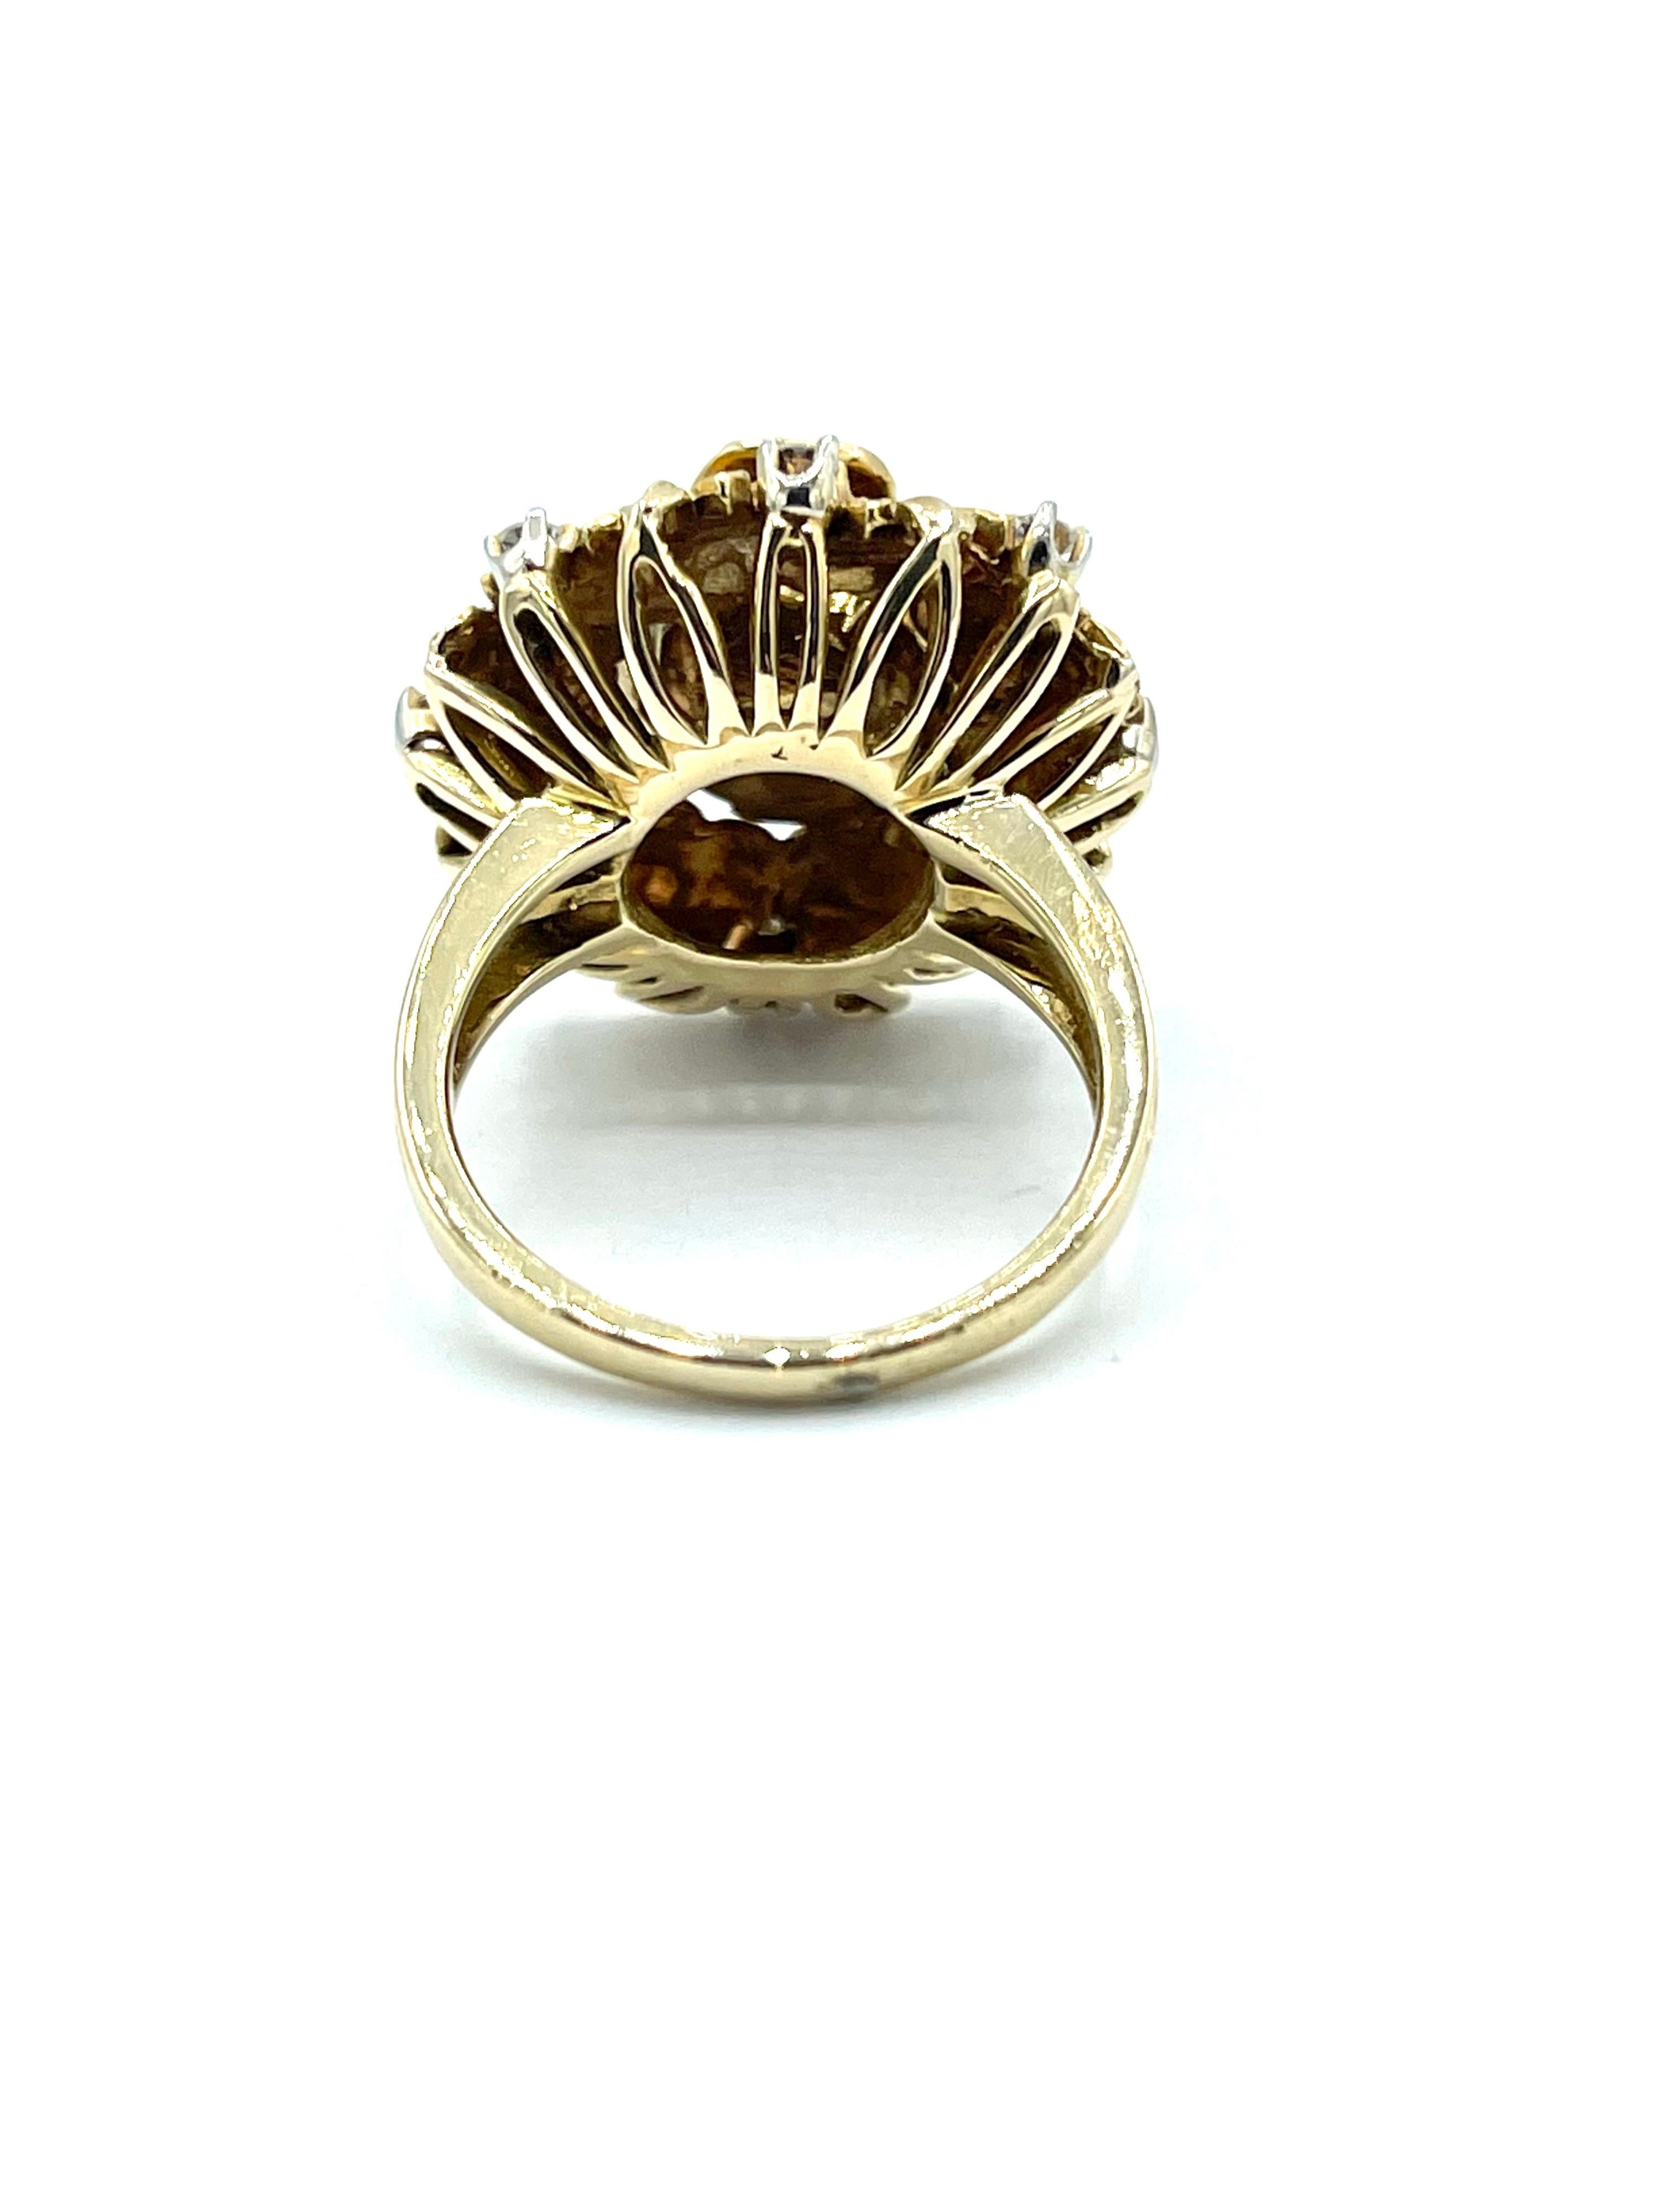 0.36 Carat Round Brilliant Diamond and Textured 18K Gold Flower Cocktail Ring For Sale 2